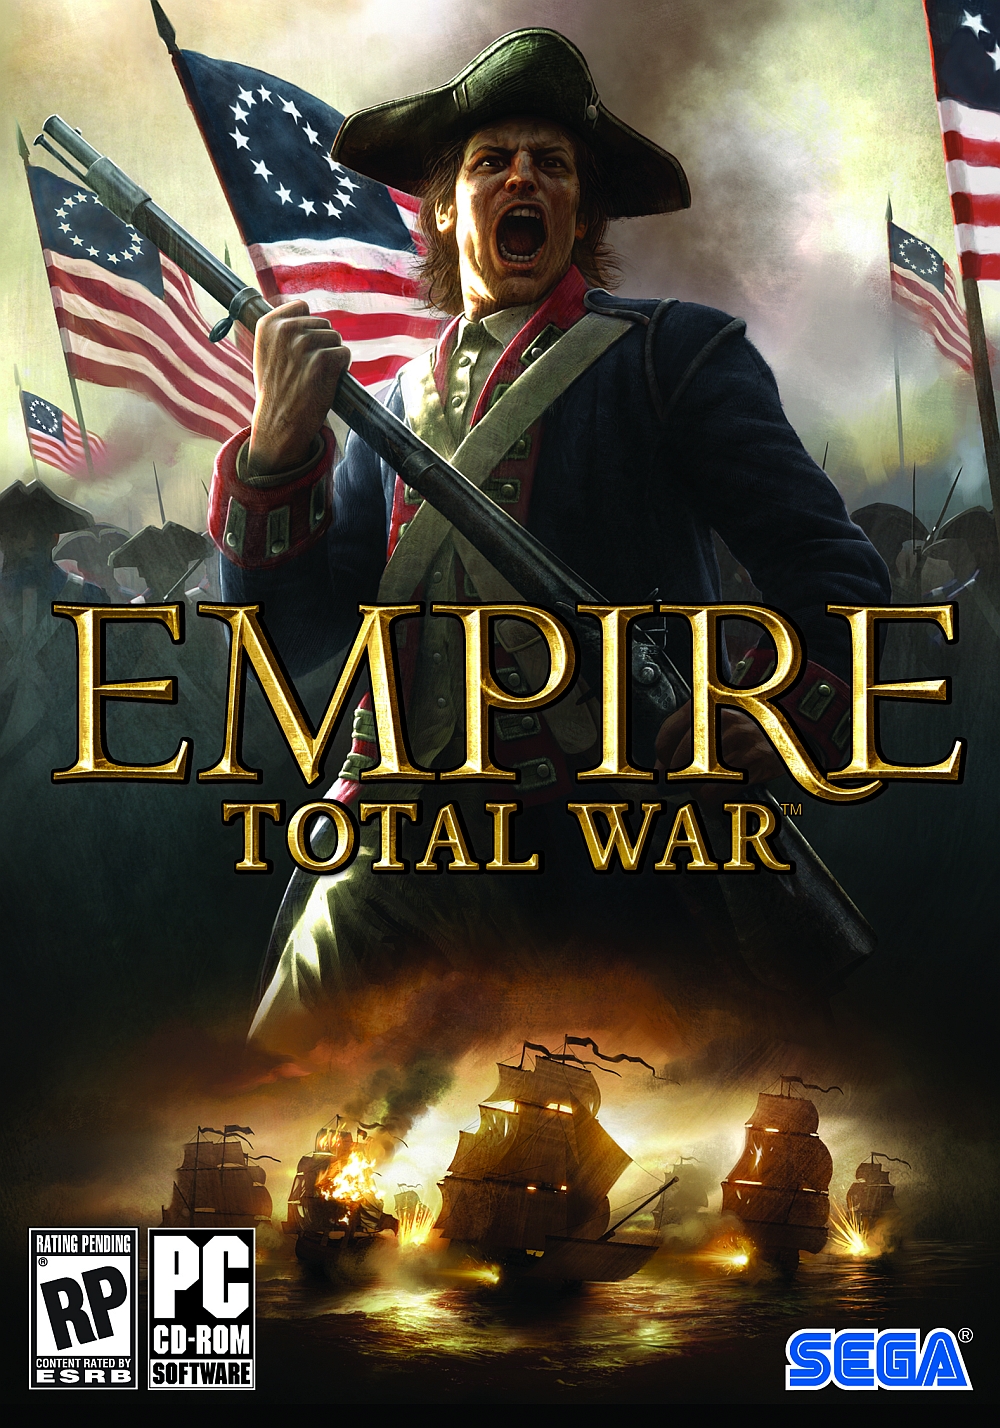 Empire Total War Screenshots, Pictures, Wallpapers - PC - IGN